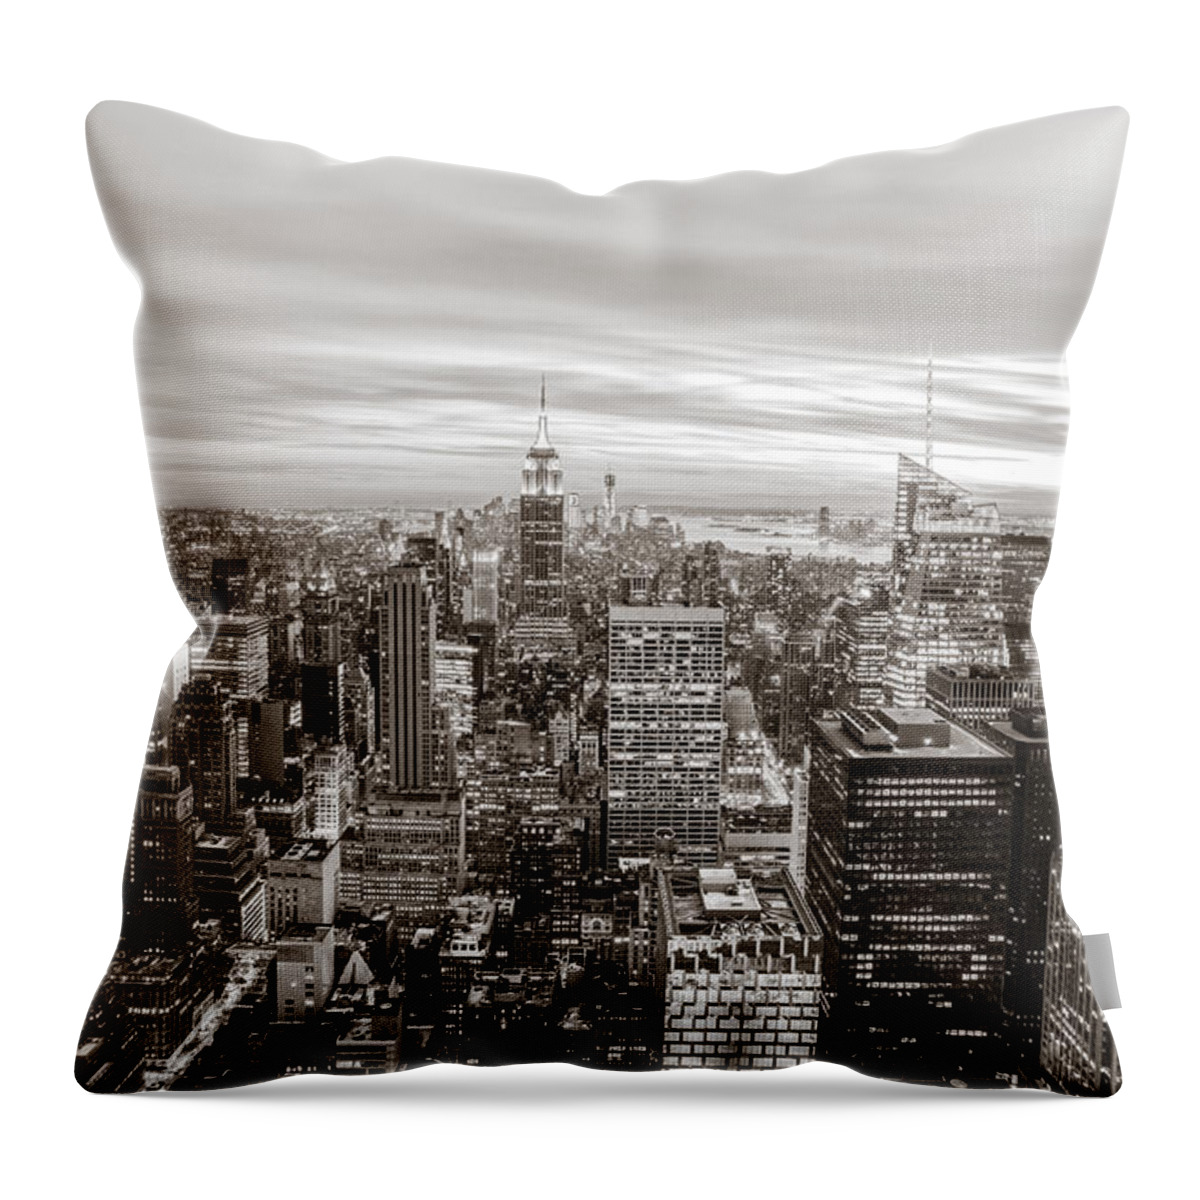 Nyc Throw Pillow featuring the photograph New York City #5 by Vivienne Gucwa